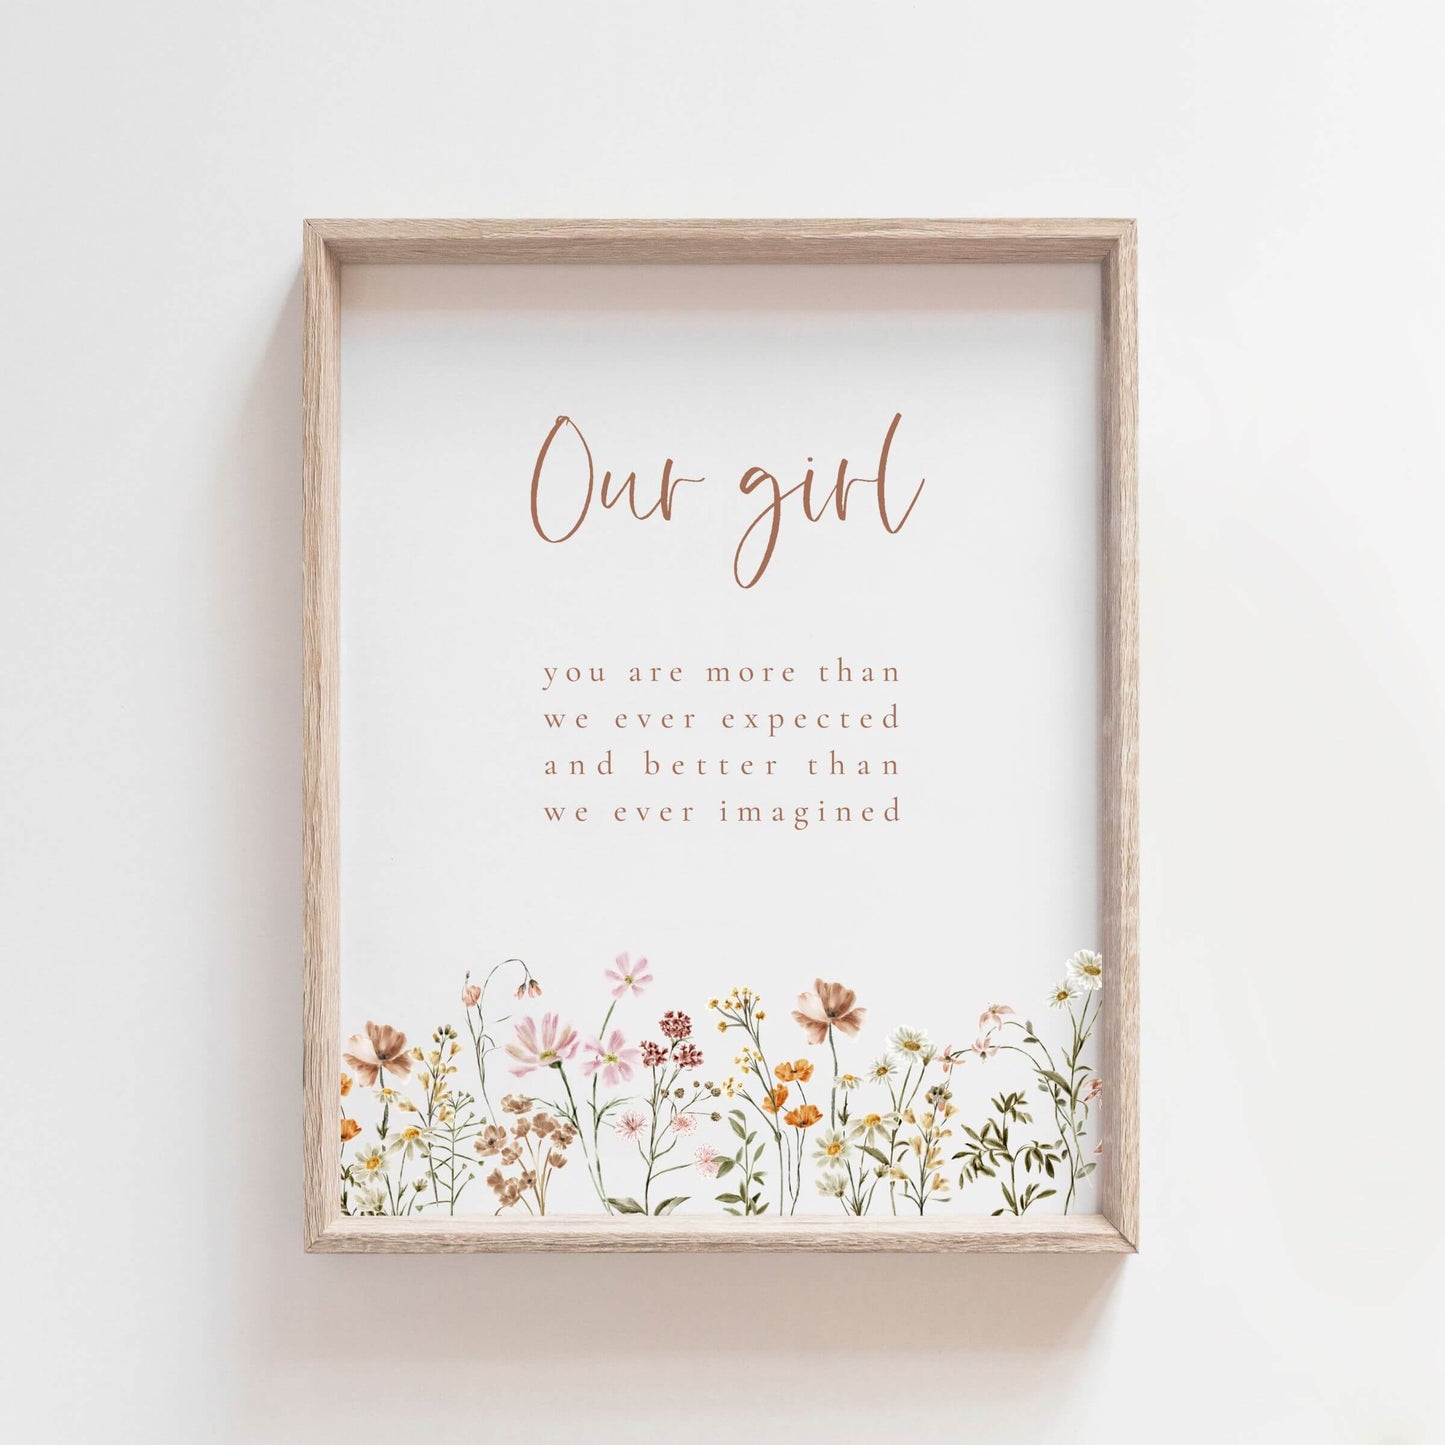 Our girl wall art with wildflowers in a wood frame